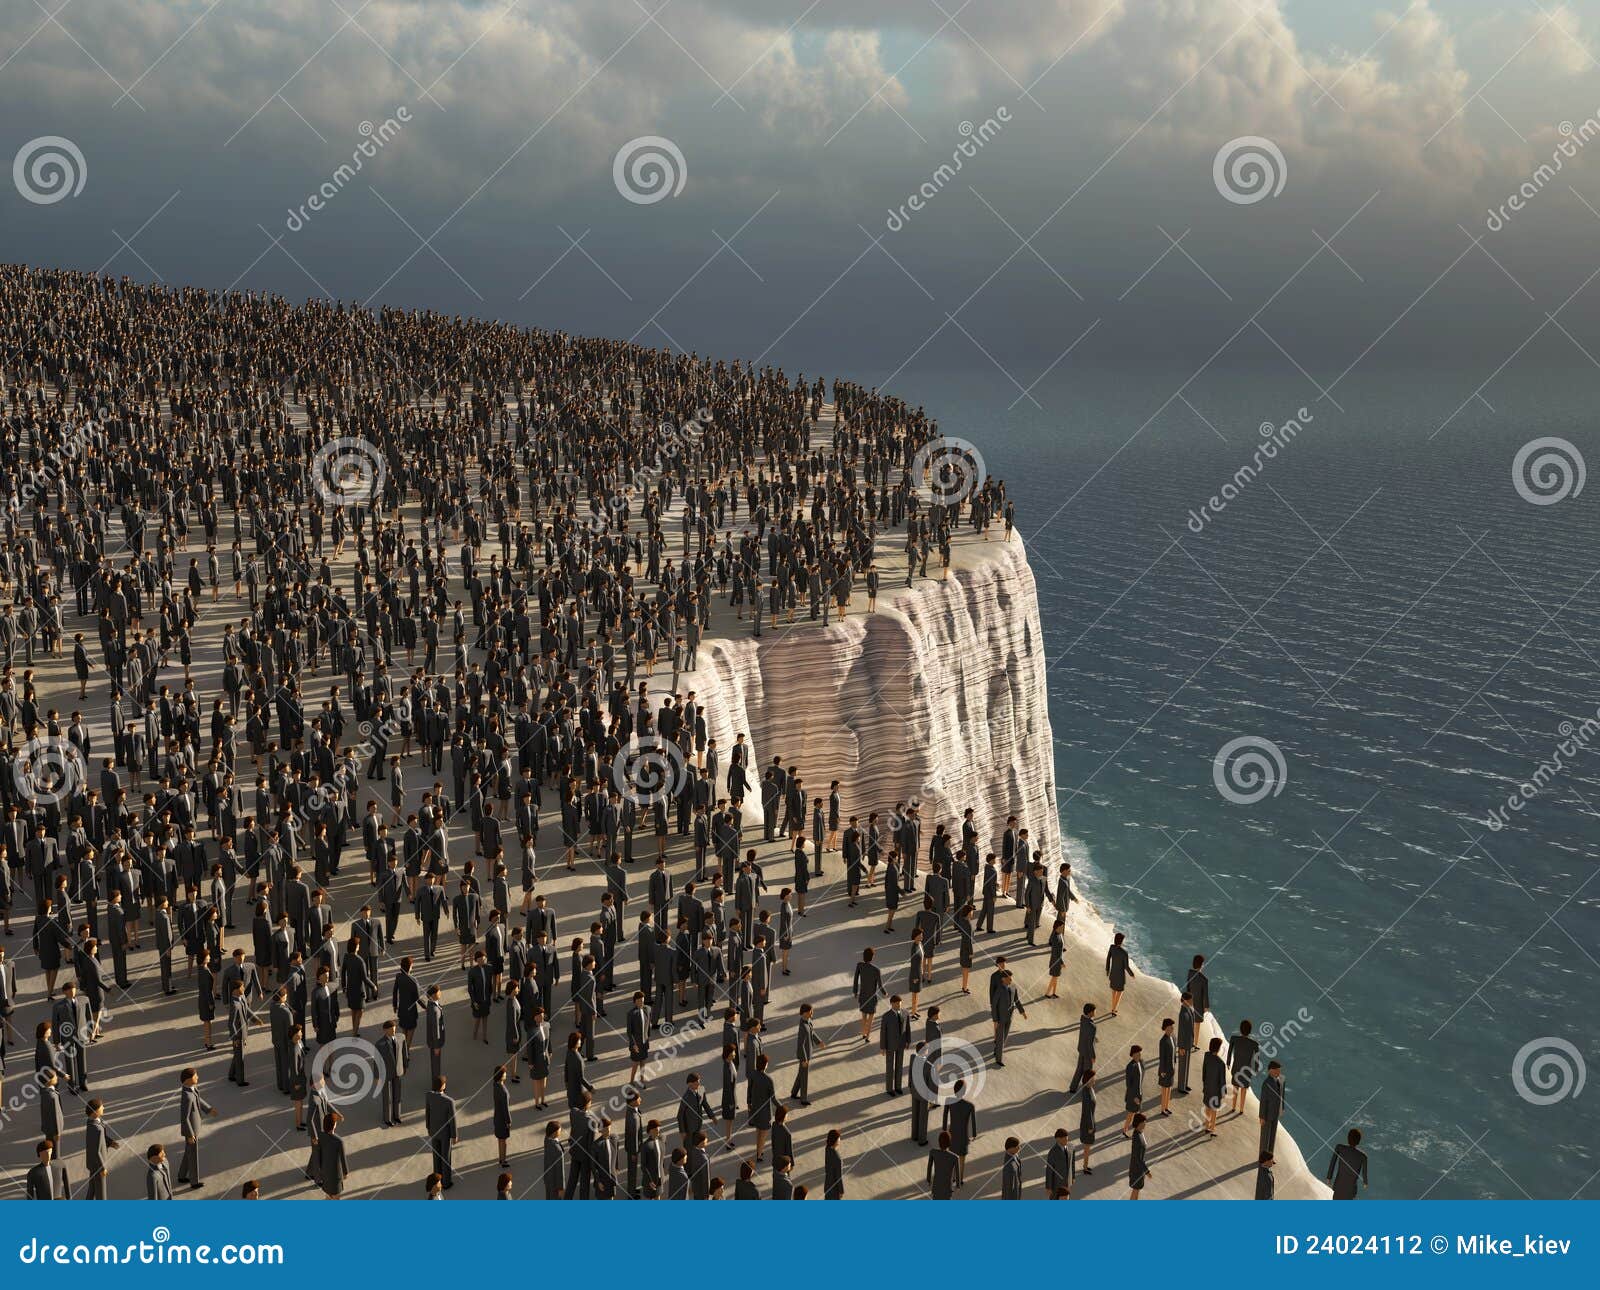 crowd on the edge of a cliff